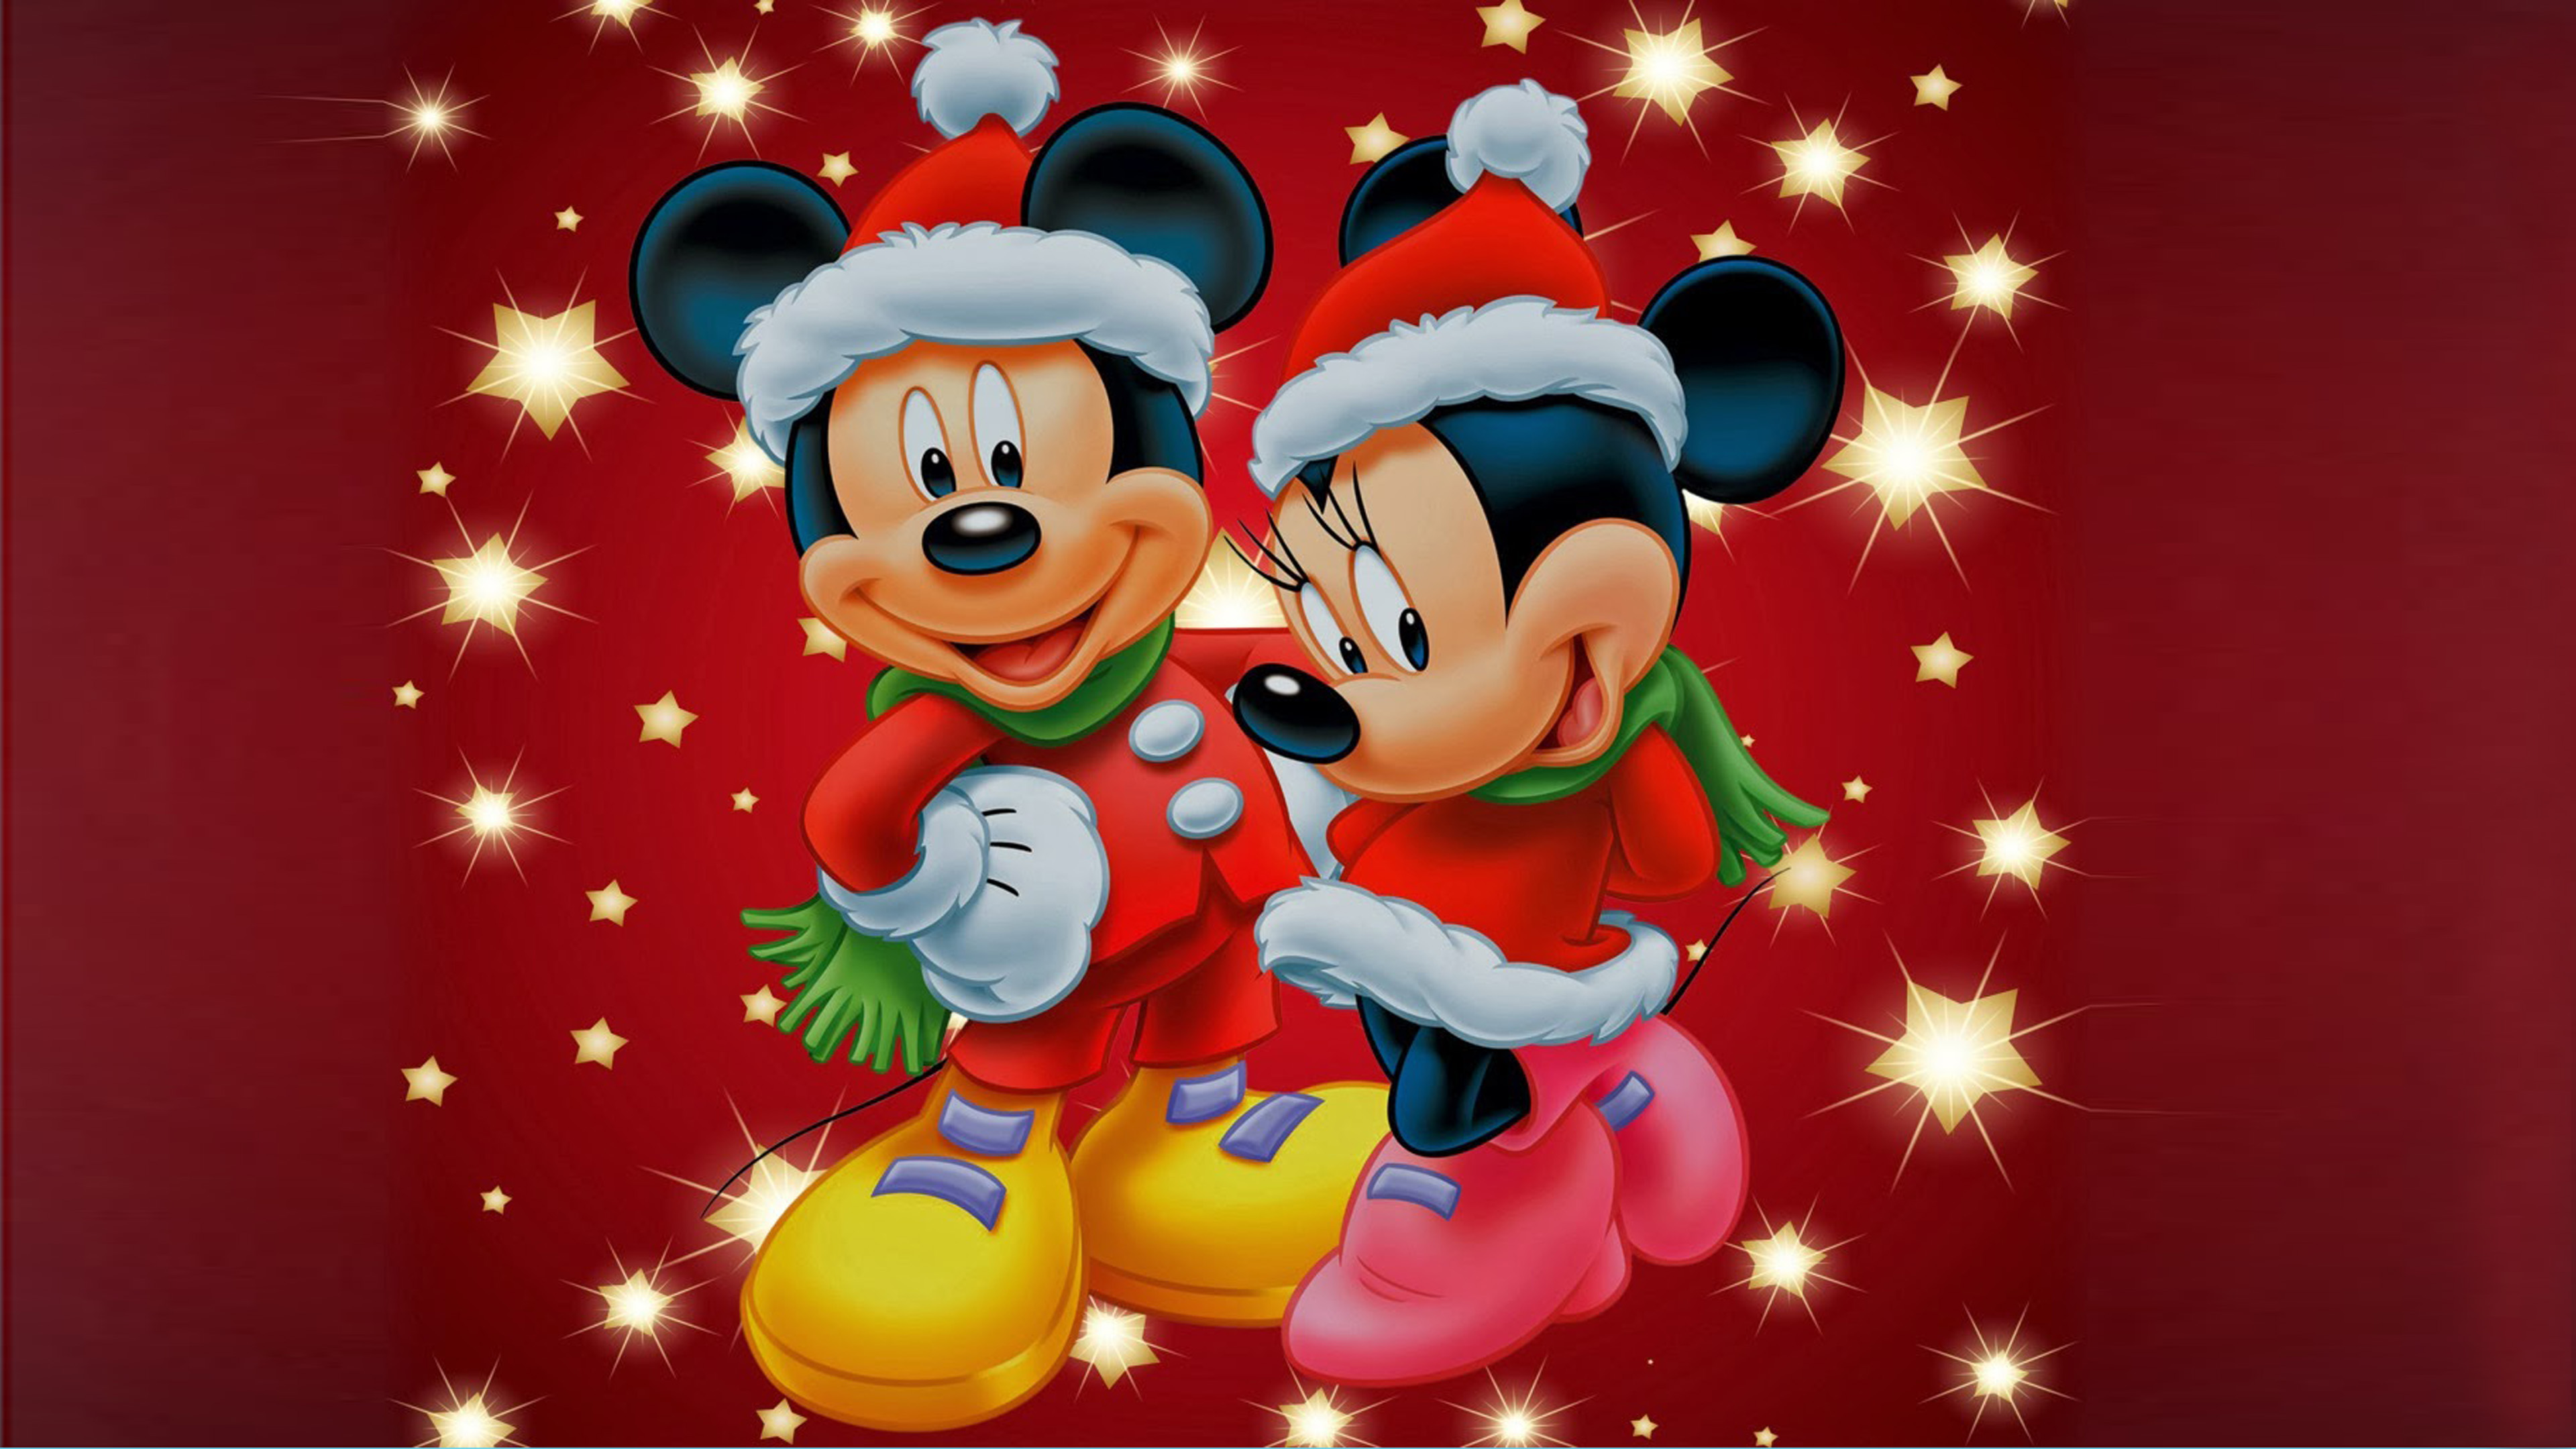 Mickey And Minnie Mouse Christmas Theme Desktop Wallpaper Hd For 3840x2160